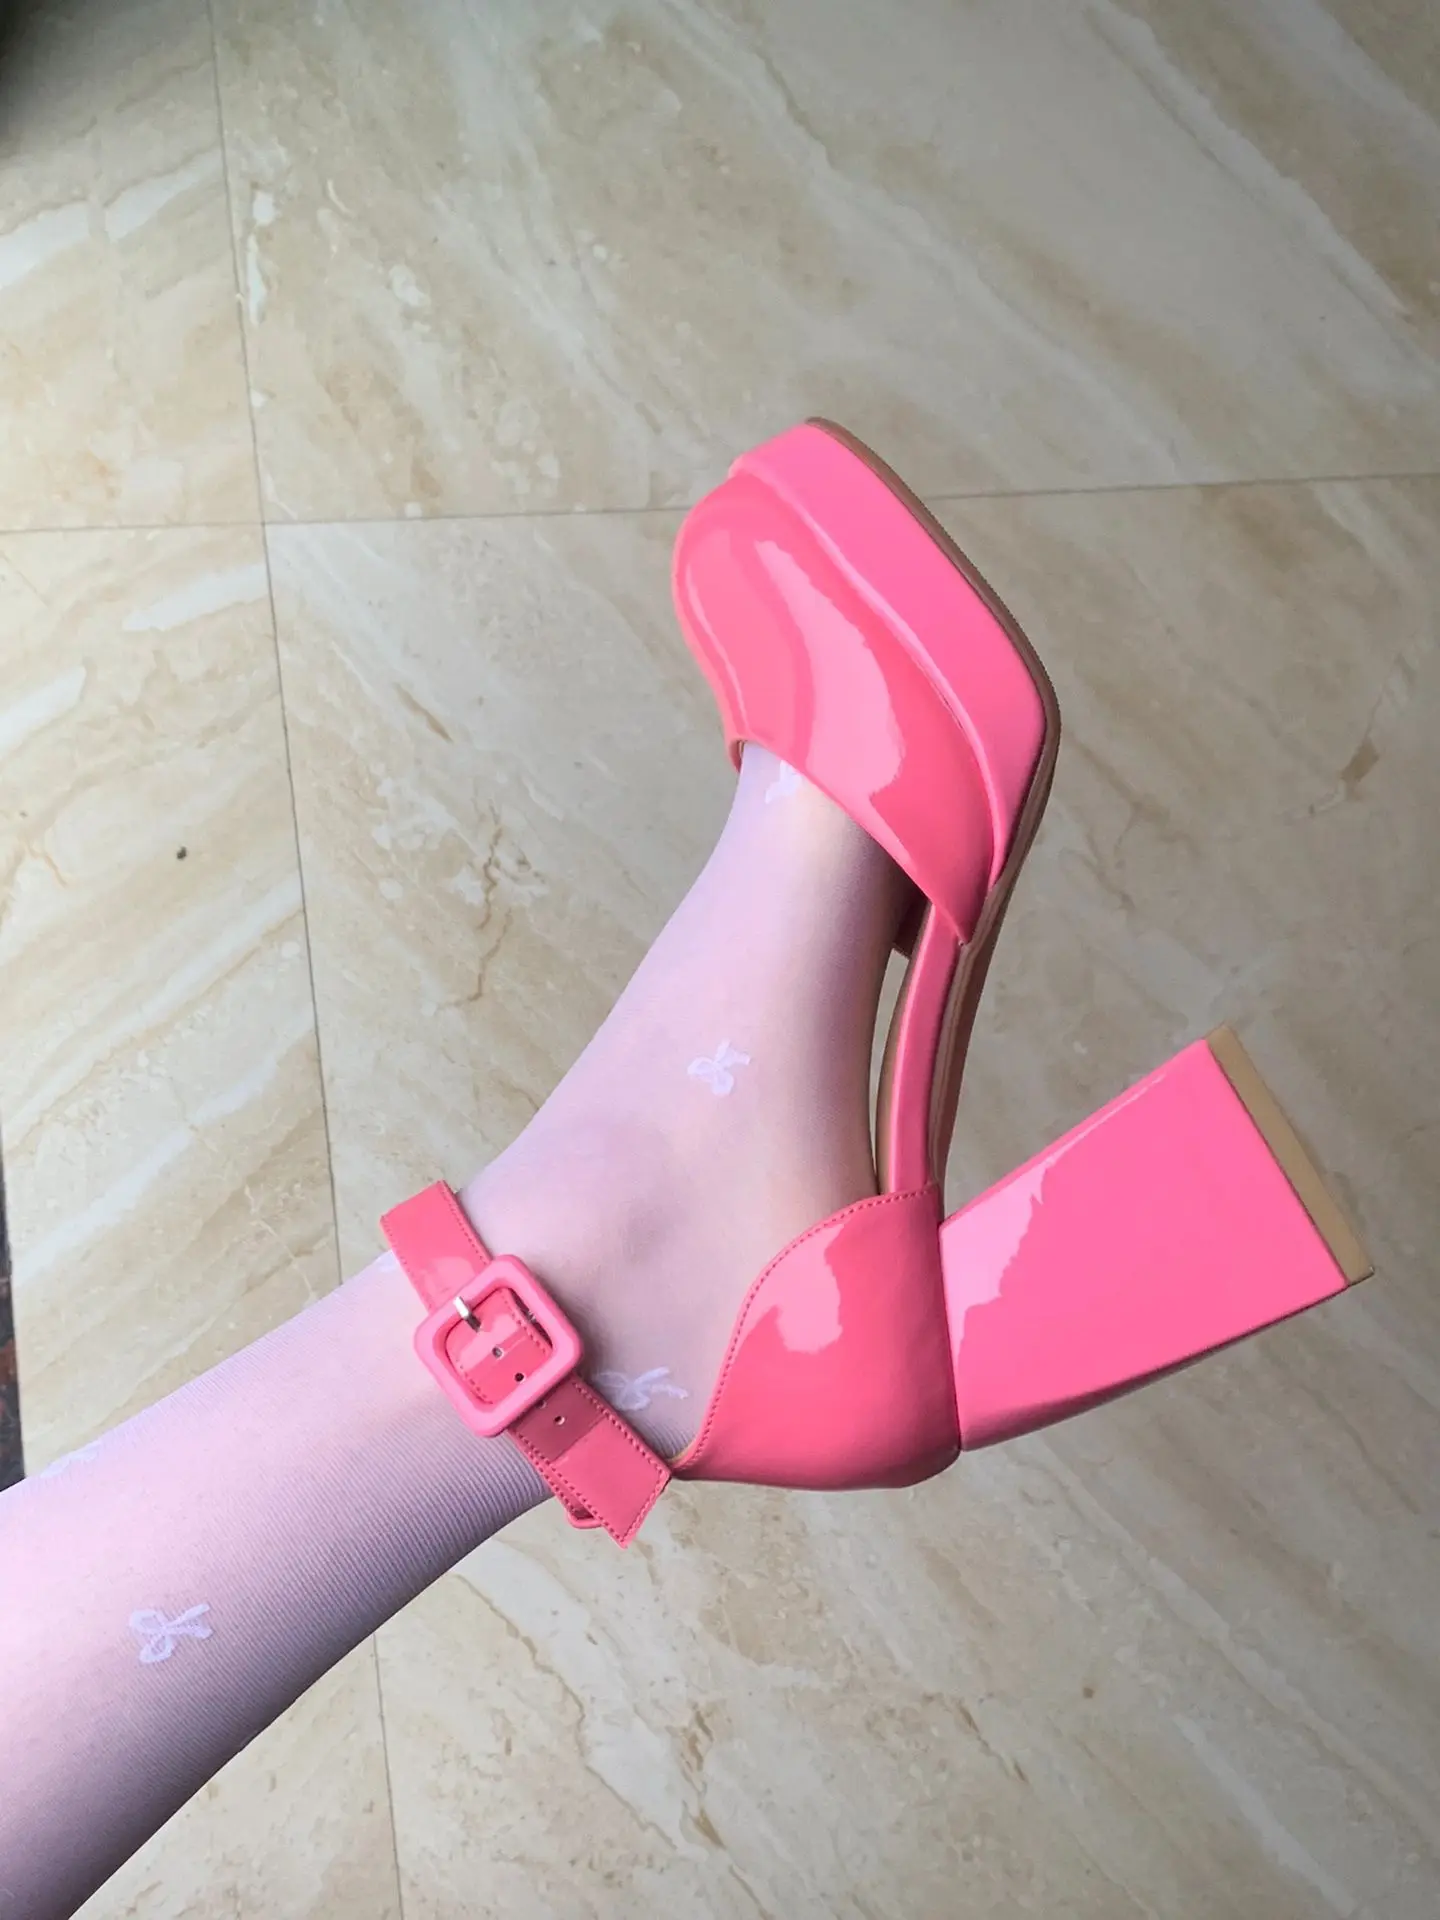 

Classic Pink Mary Jane Chunky Heel Shoes Princess Cosplay Party Dance Shoes INS Style Platform Pumps Ladies Sweet Dating Sandals